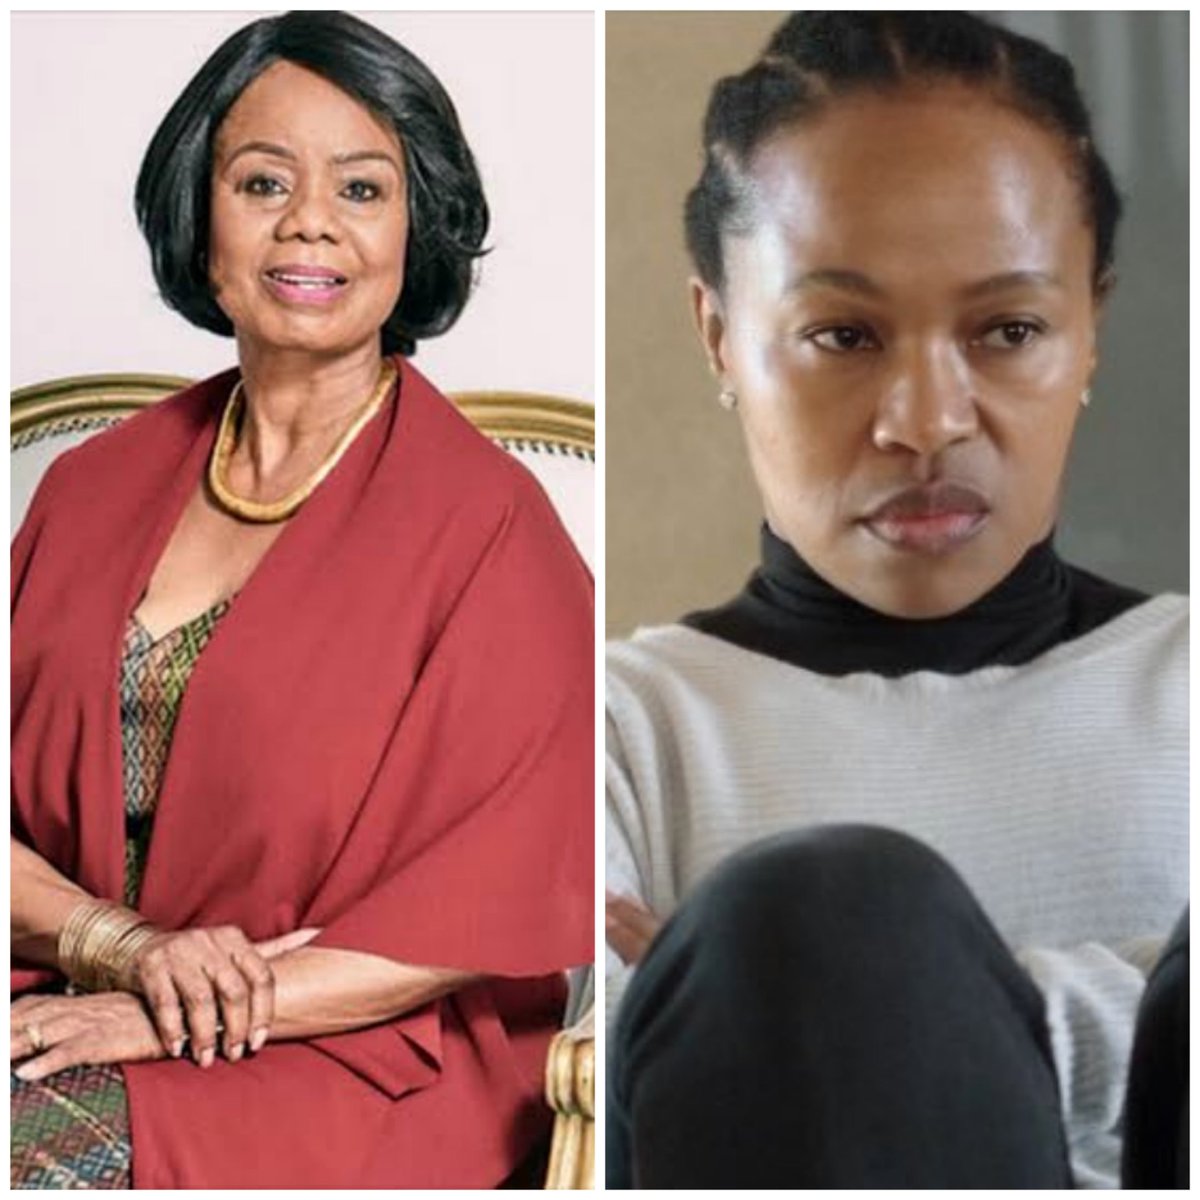 My ideal matches 💁🏽‍♀️💁🏽‍♀️ plus #TheRiver1Magic casting doesn't miss yazi
They could pass as Family 💁🏽‍♀️💁🏽‍♀️